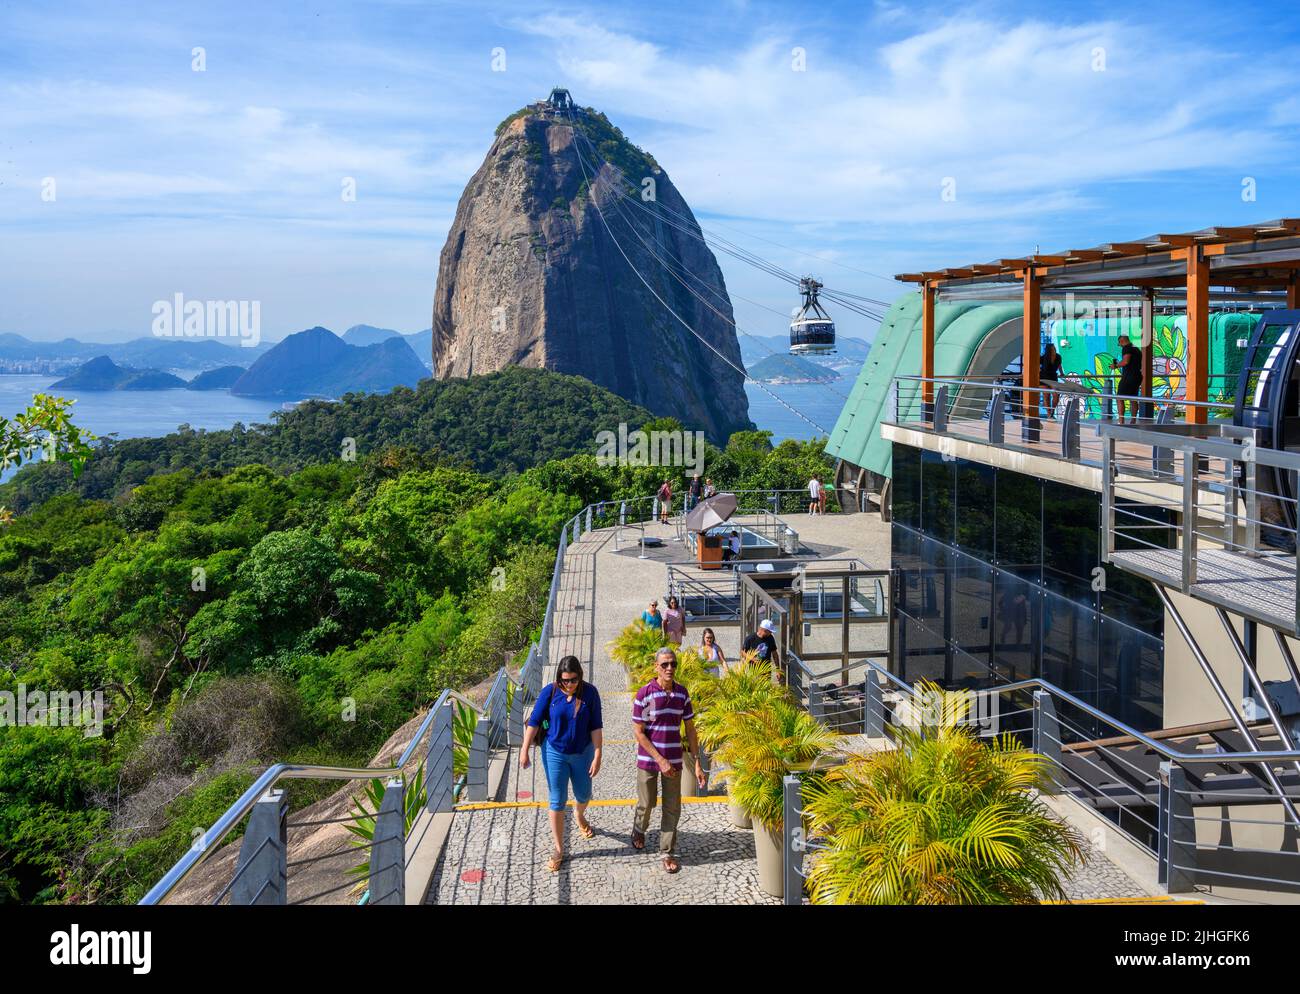 Middle station of the Sugarloaf Cable Car, looking up to Sugarloaf Mountain, Morro da Urca, Sugarloaf Mountain, Rio de Janeiro, Brazil Stock Photo